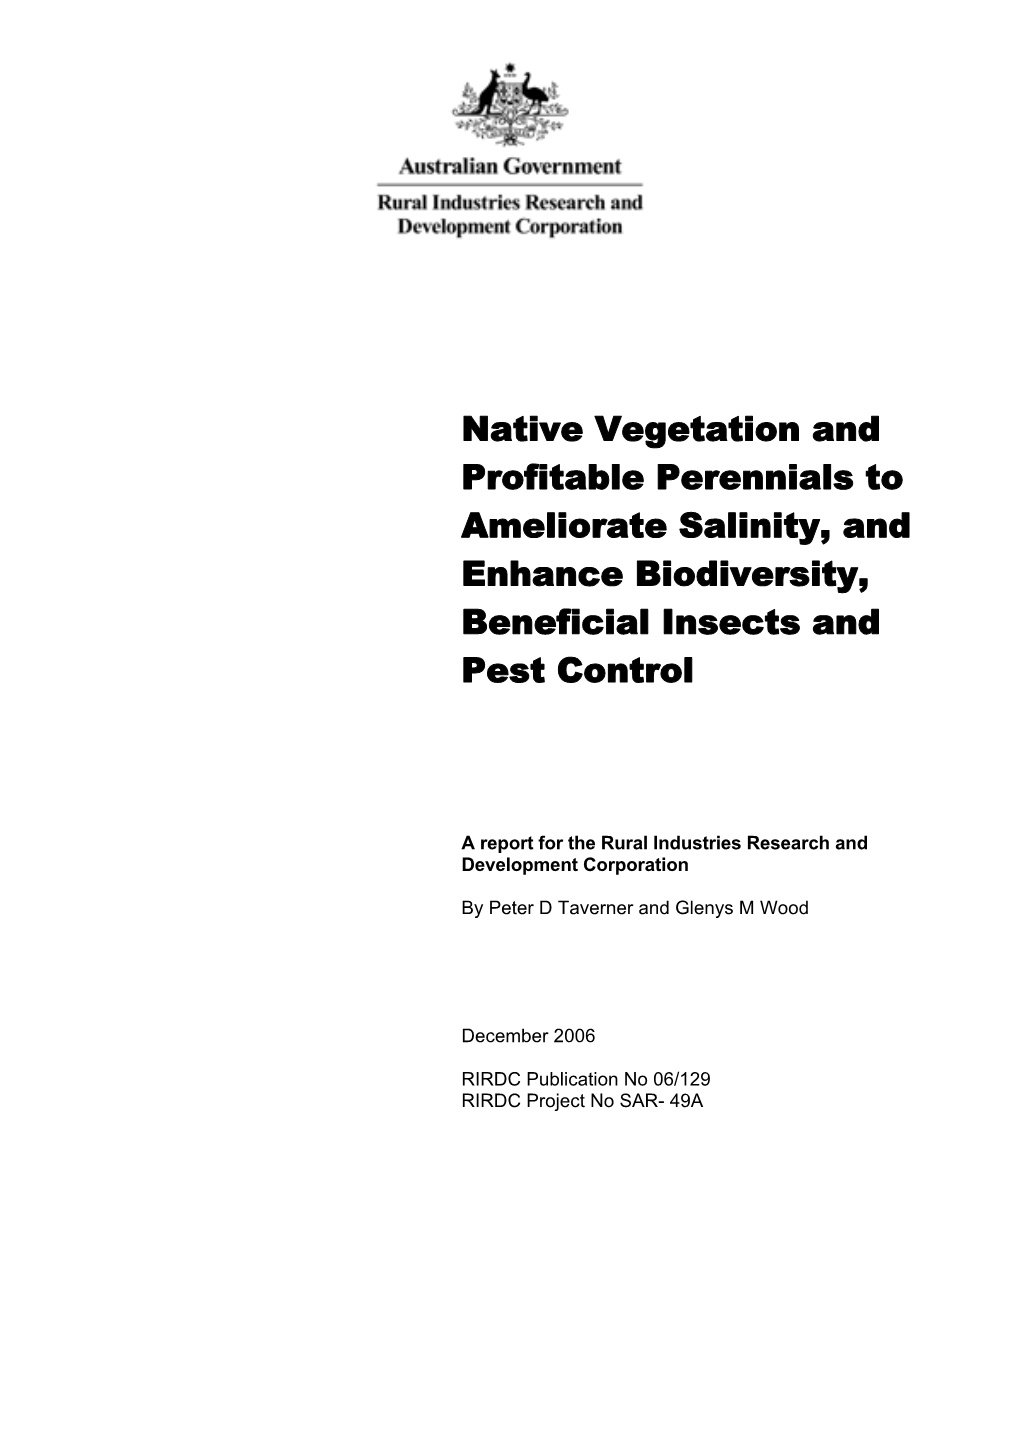 Native Vegetation and Profitable Perennials to Ameliorate Salinity, and Enhance Biodiversity, Beneficial Insects and Pest Control